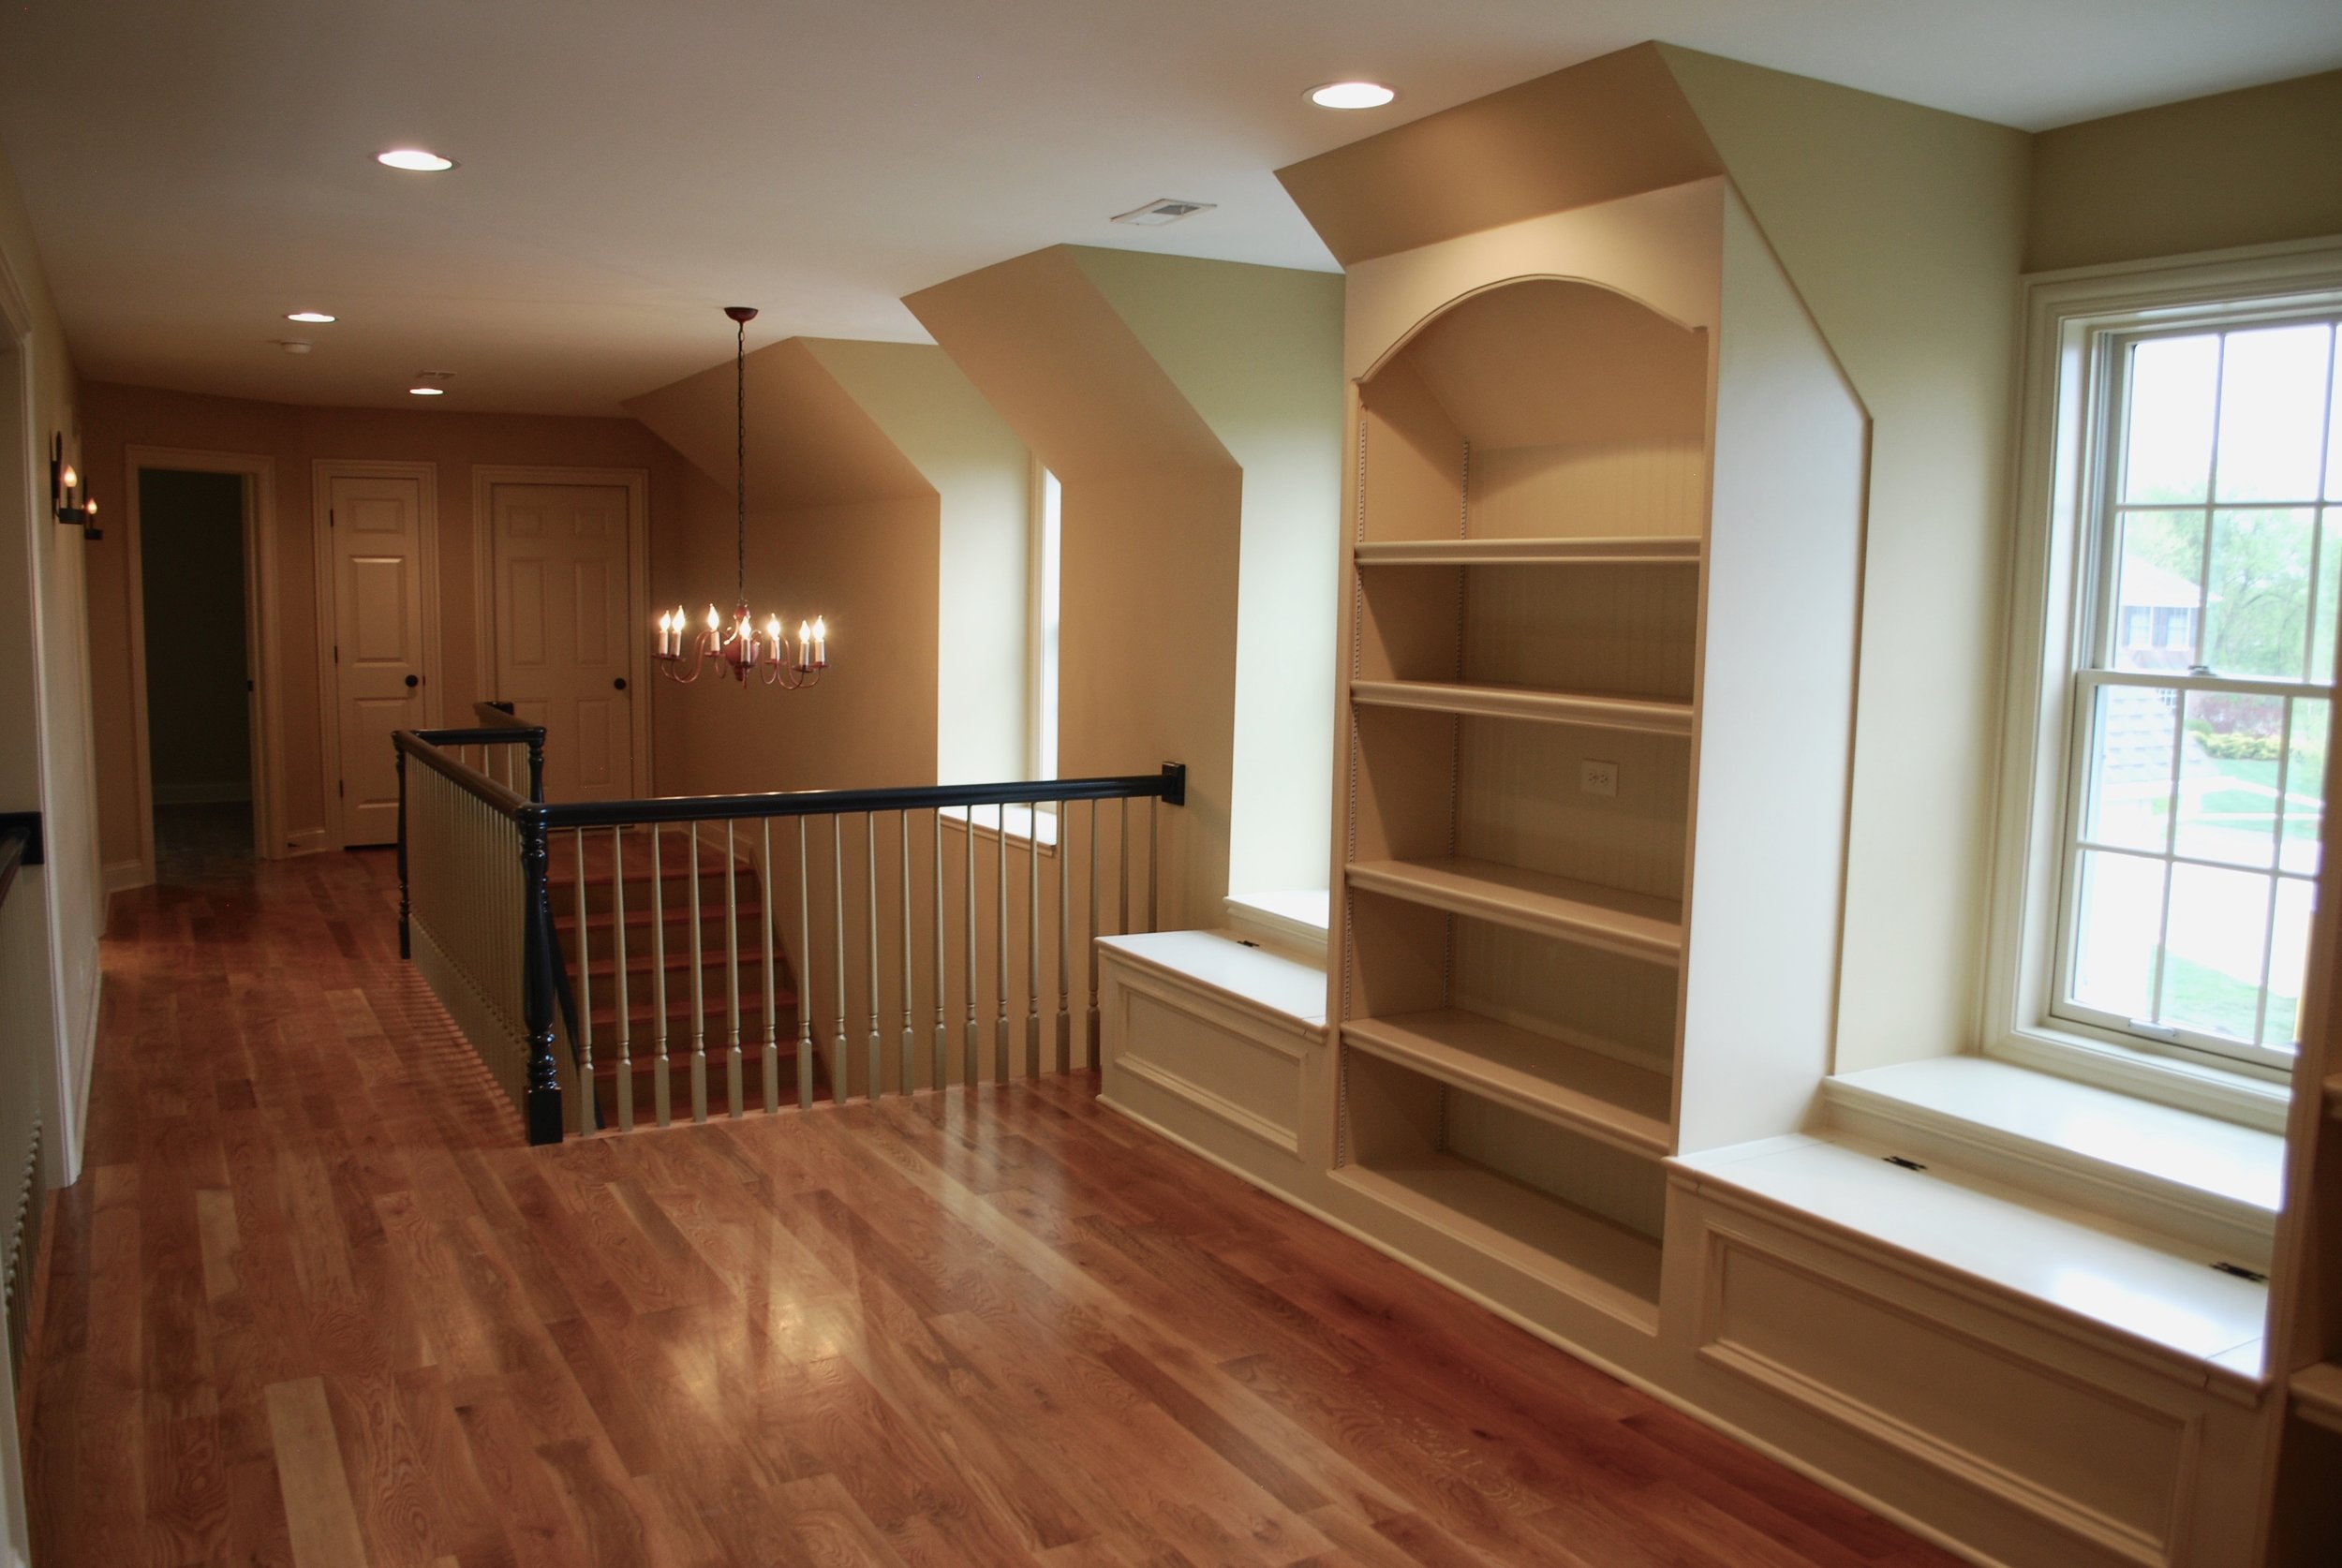 Built in Book Cases in this Custom Home Loft 